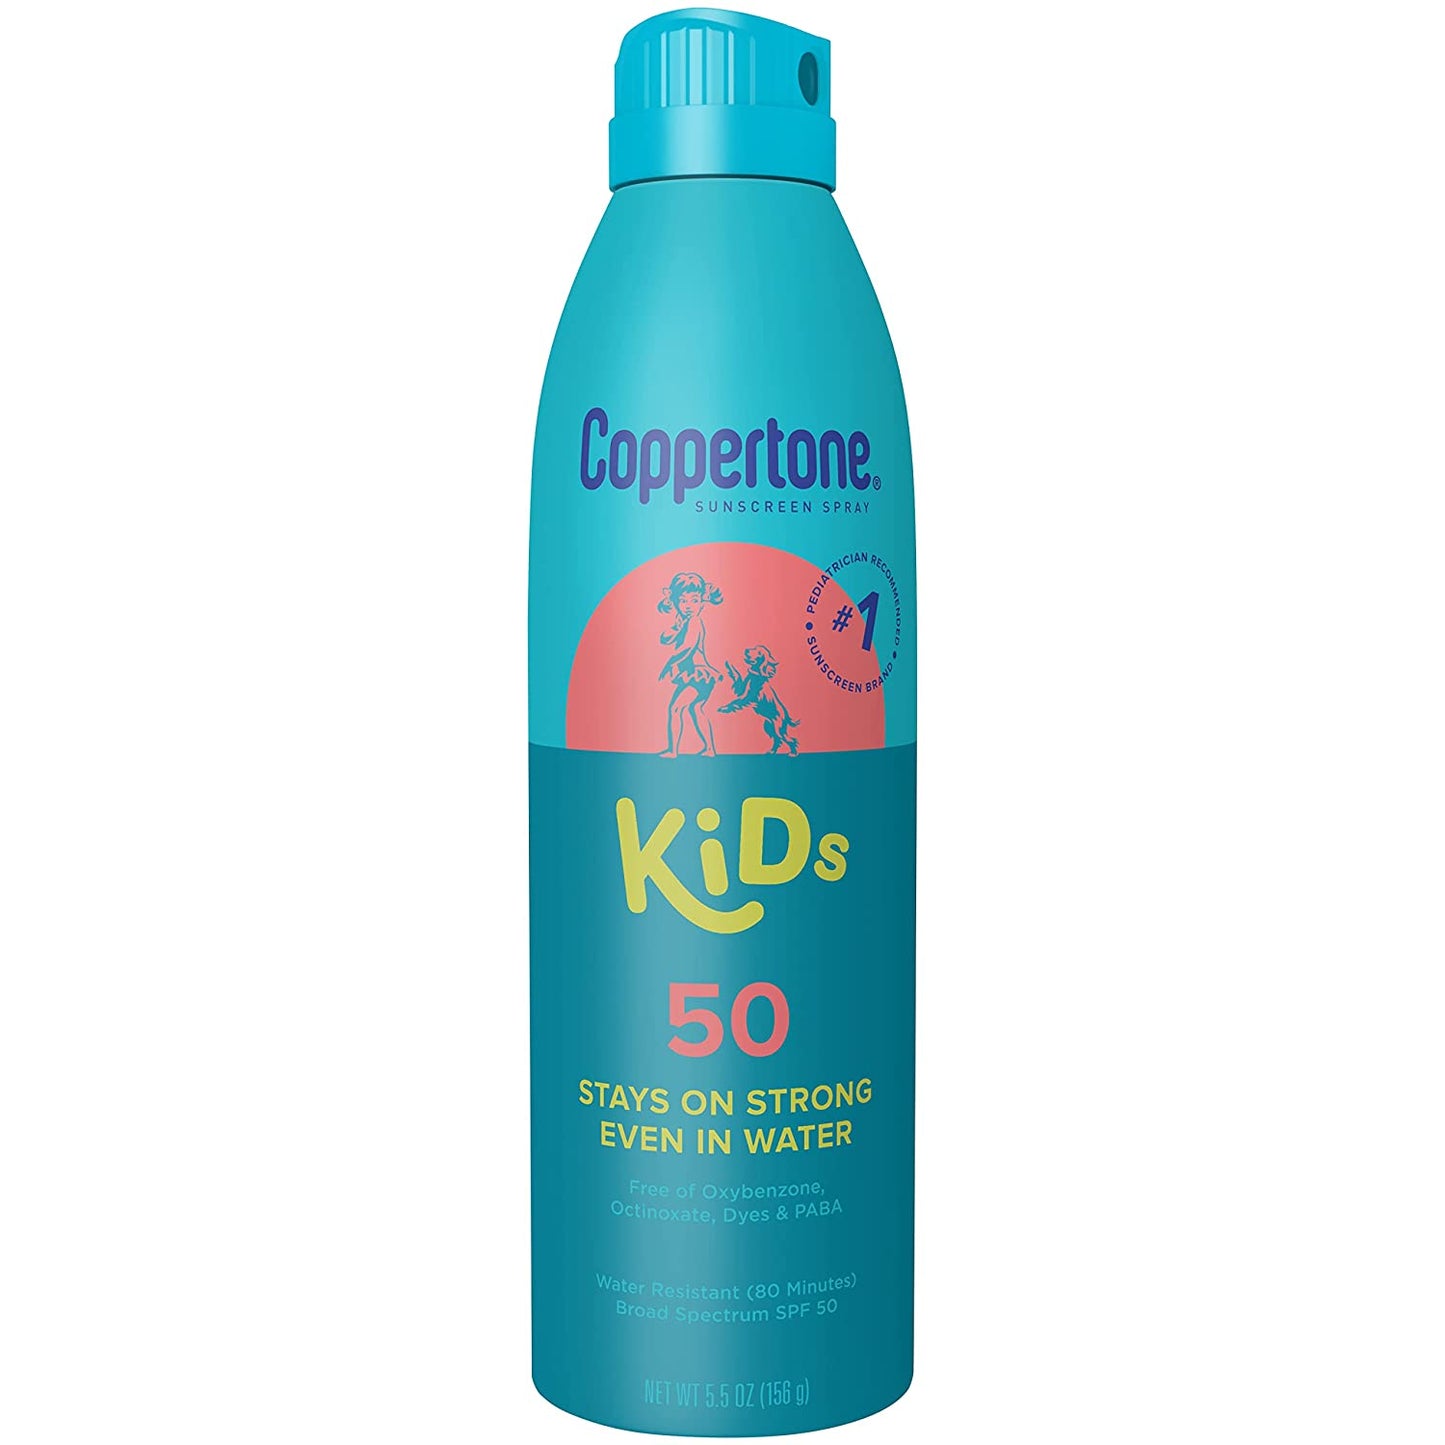 Coppertone Kids Stay On Strong Even In Water 50 SPF 5.5 Oz (156g)